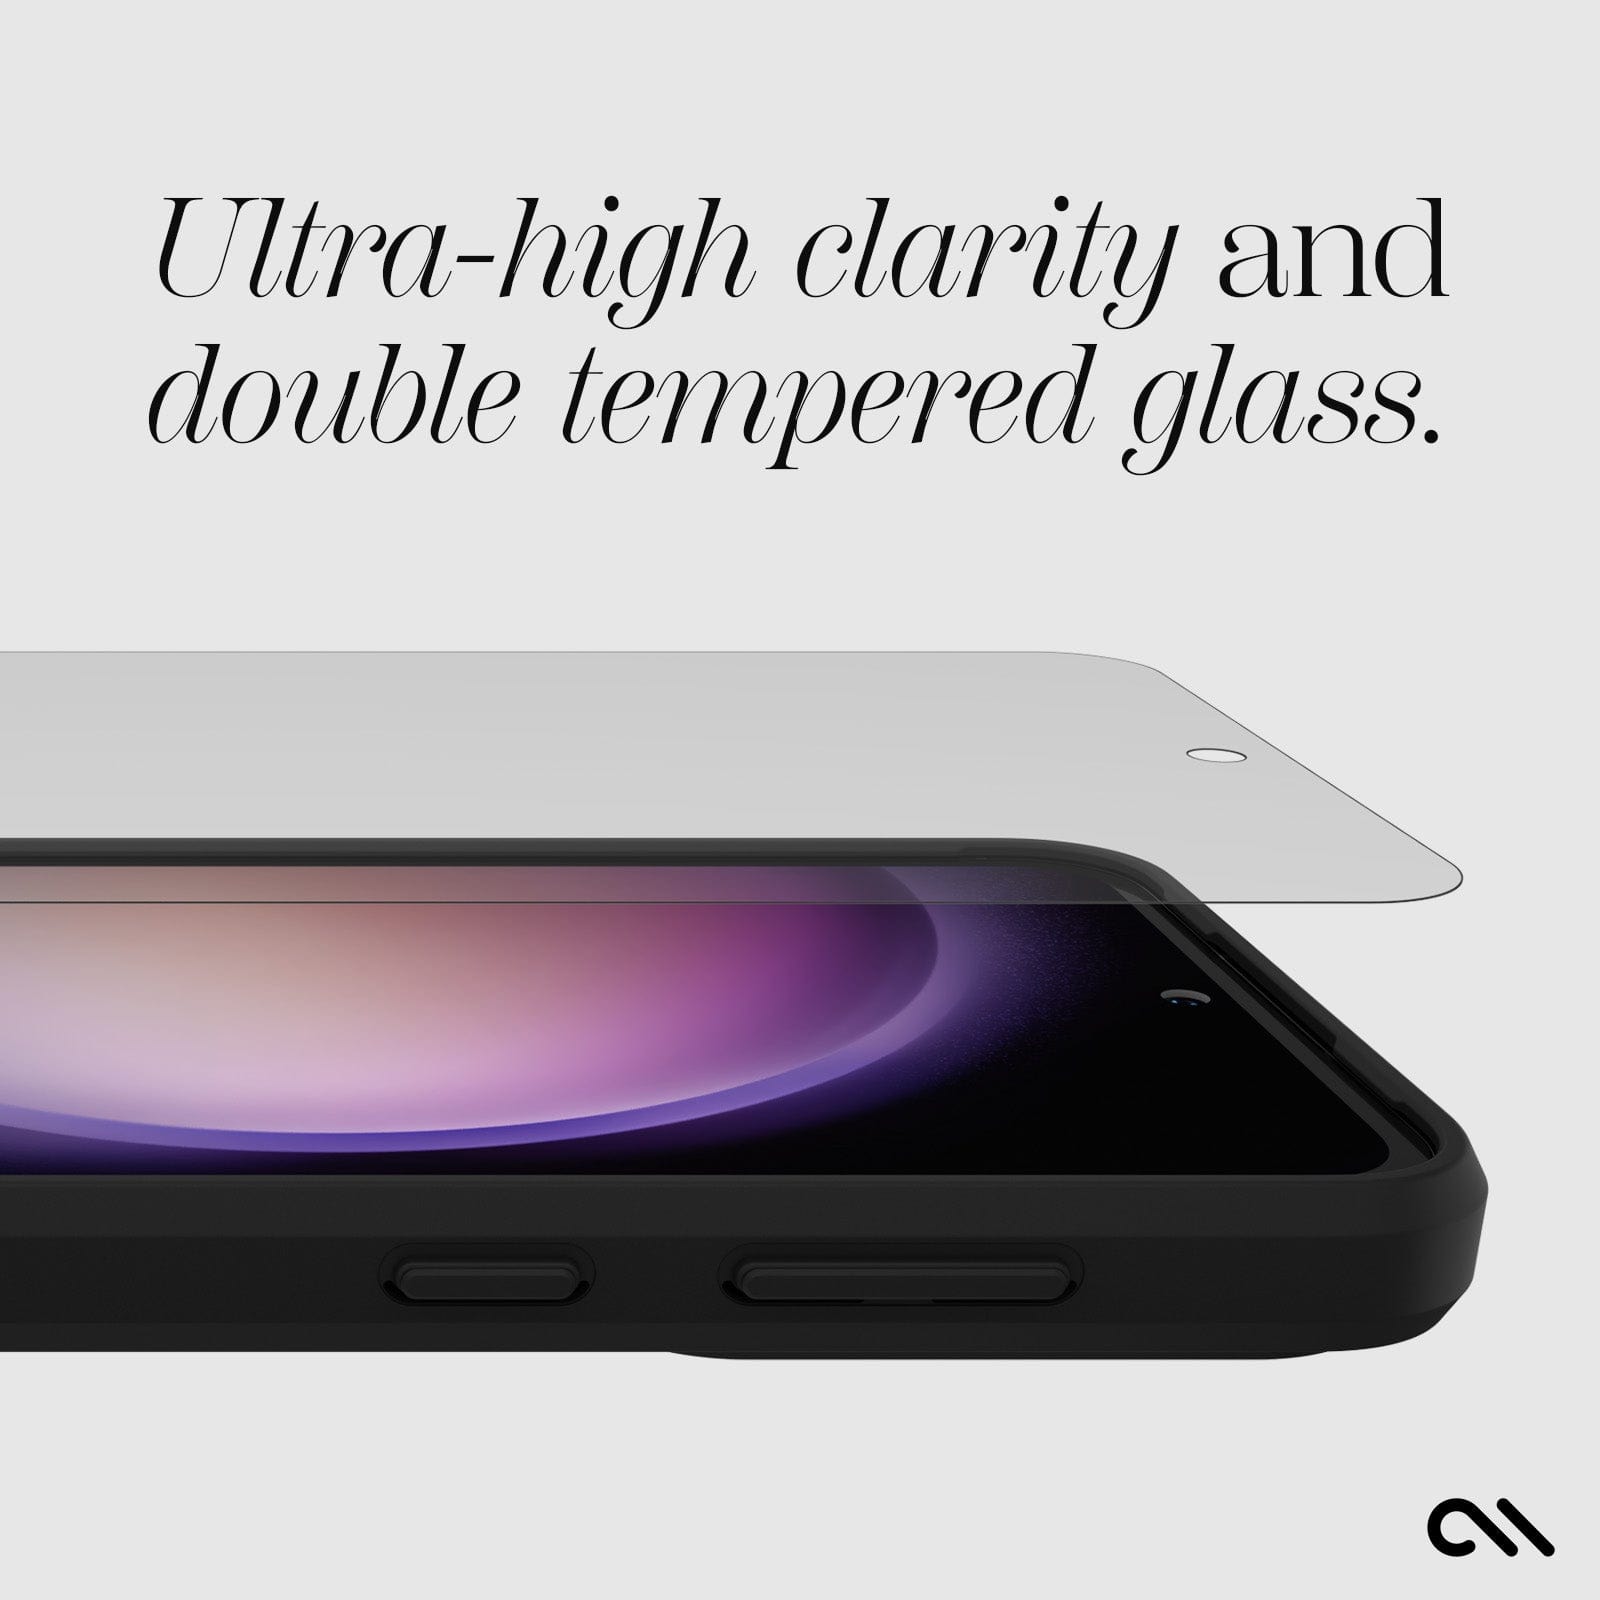 ULTRA-HIGH CLARITY AND DOUBLE TEMPERED GLASS